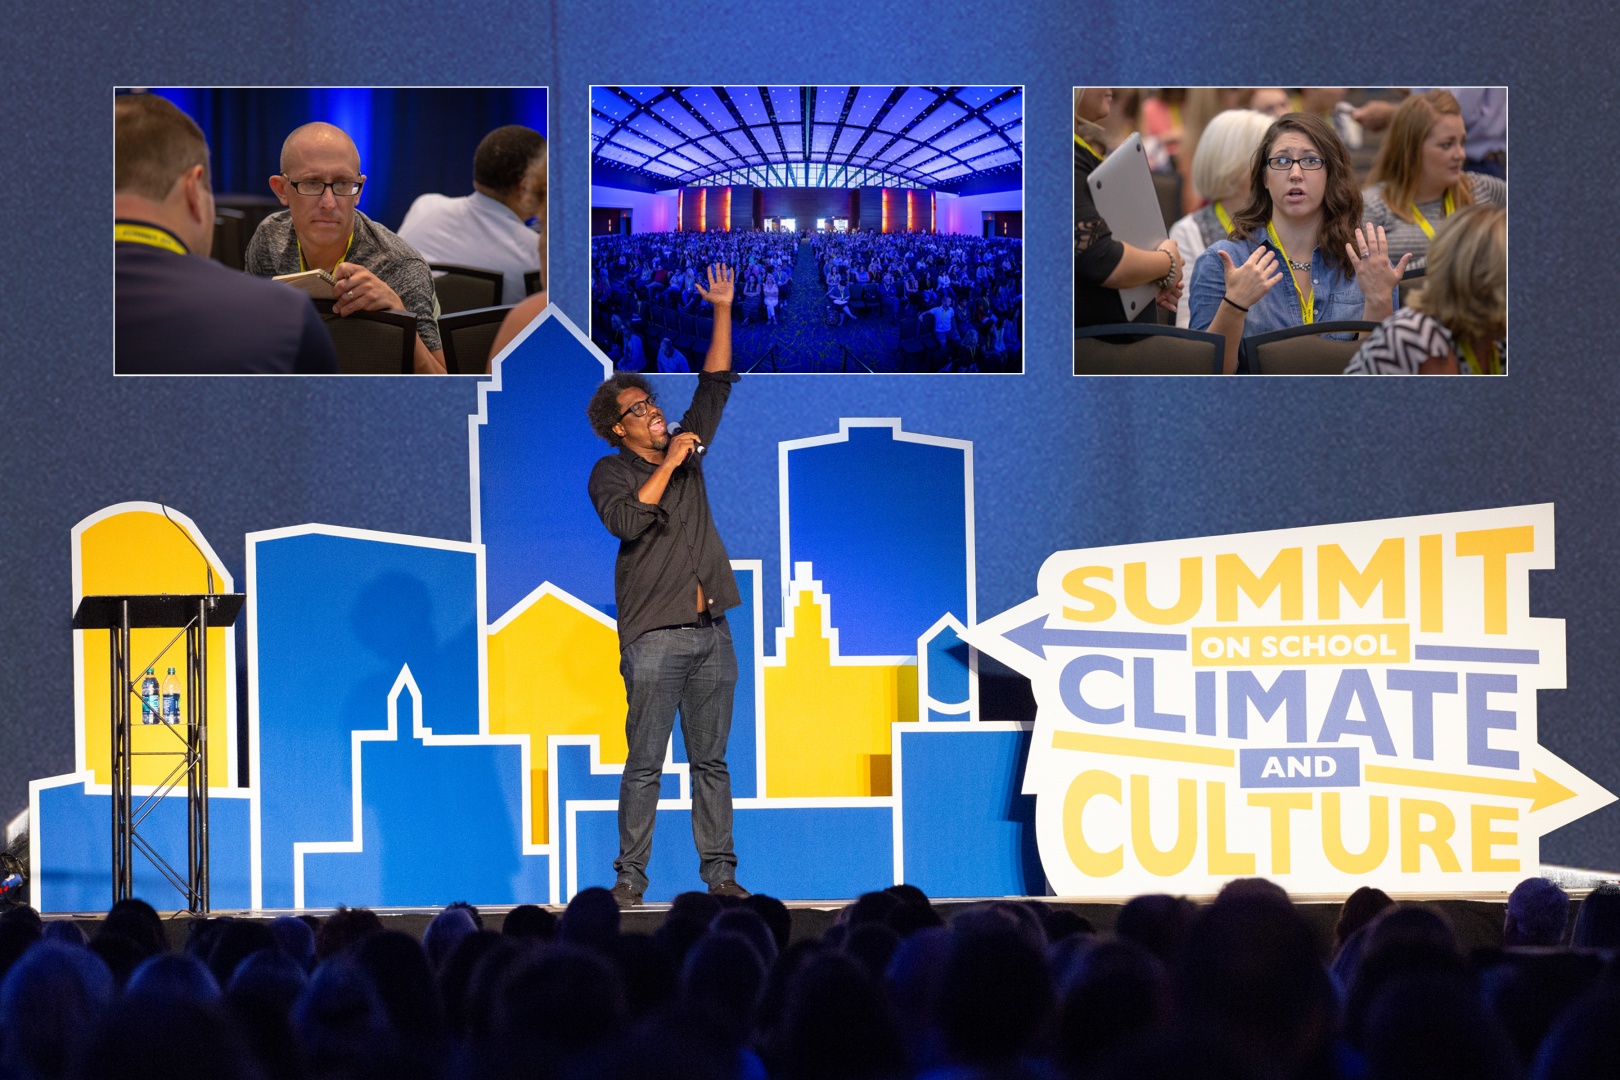 Summit on School Climate and Culture